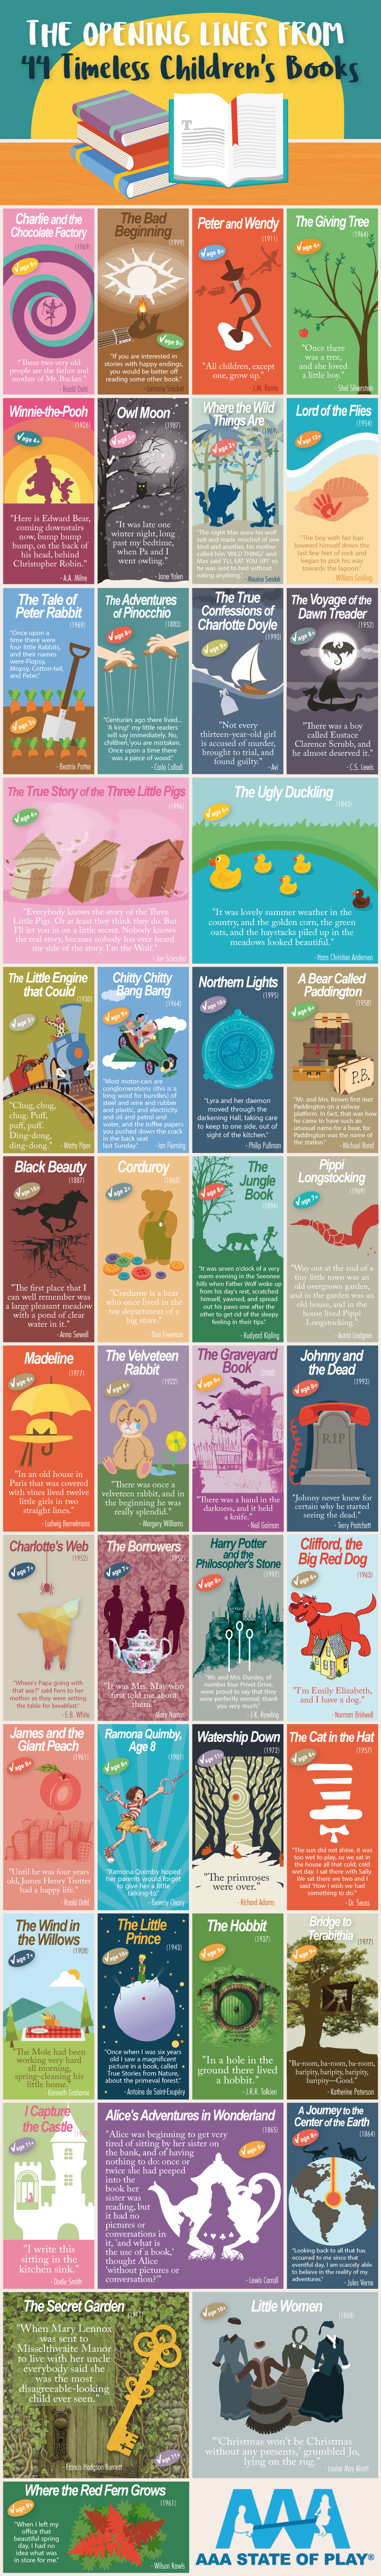 The Opening Lines Of The World's Most Famous Books